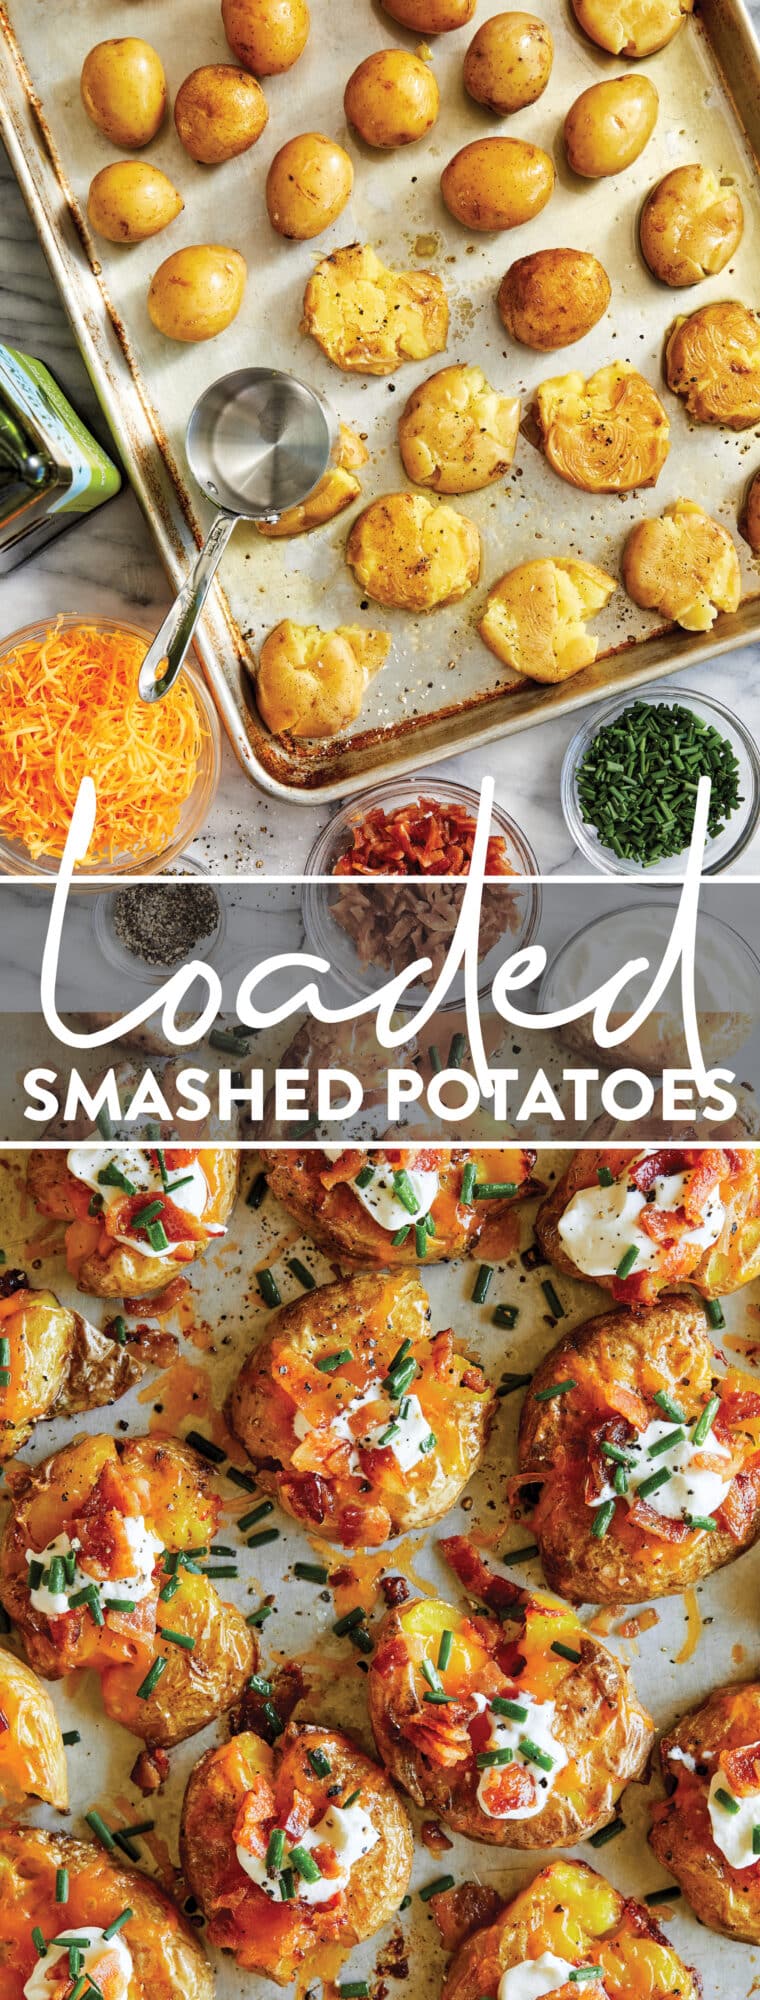 Loaded Smashed Potatoes - SUPER CRISPY smashed potatoes topped with sour cream, bacon + chives. The easiest most perfect bite-sized appetizer.